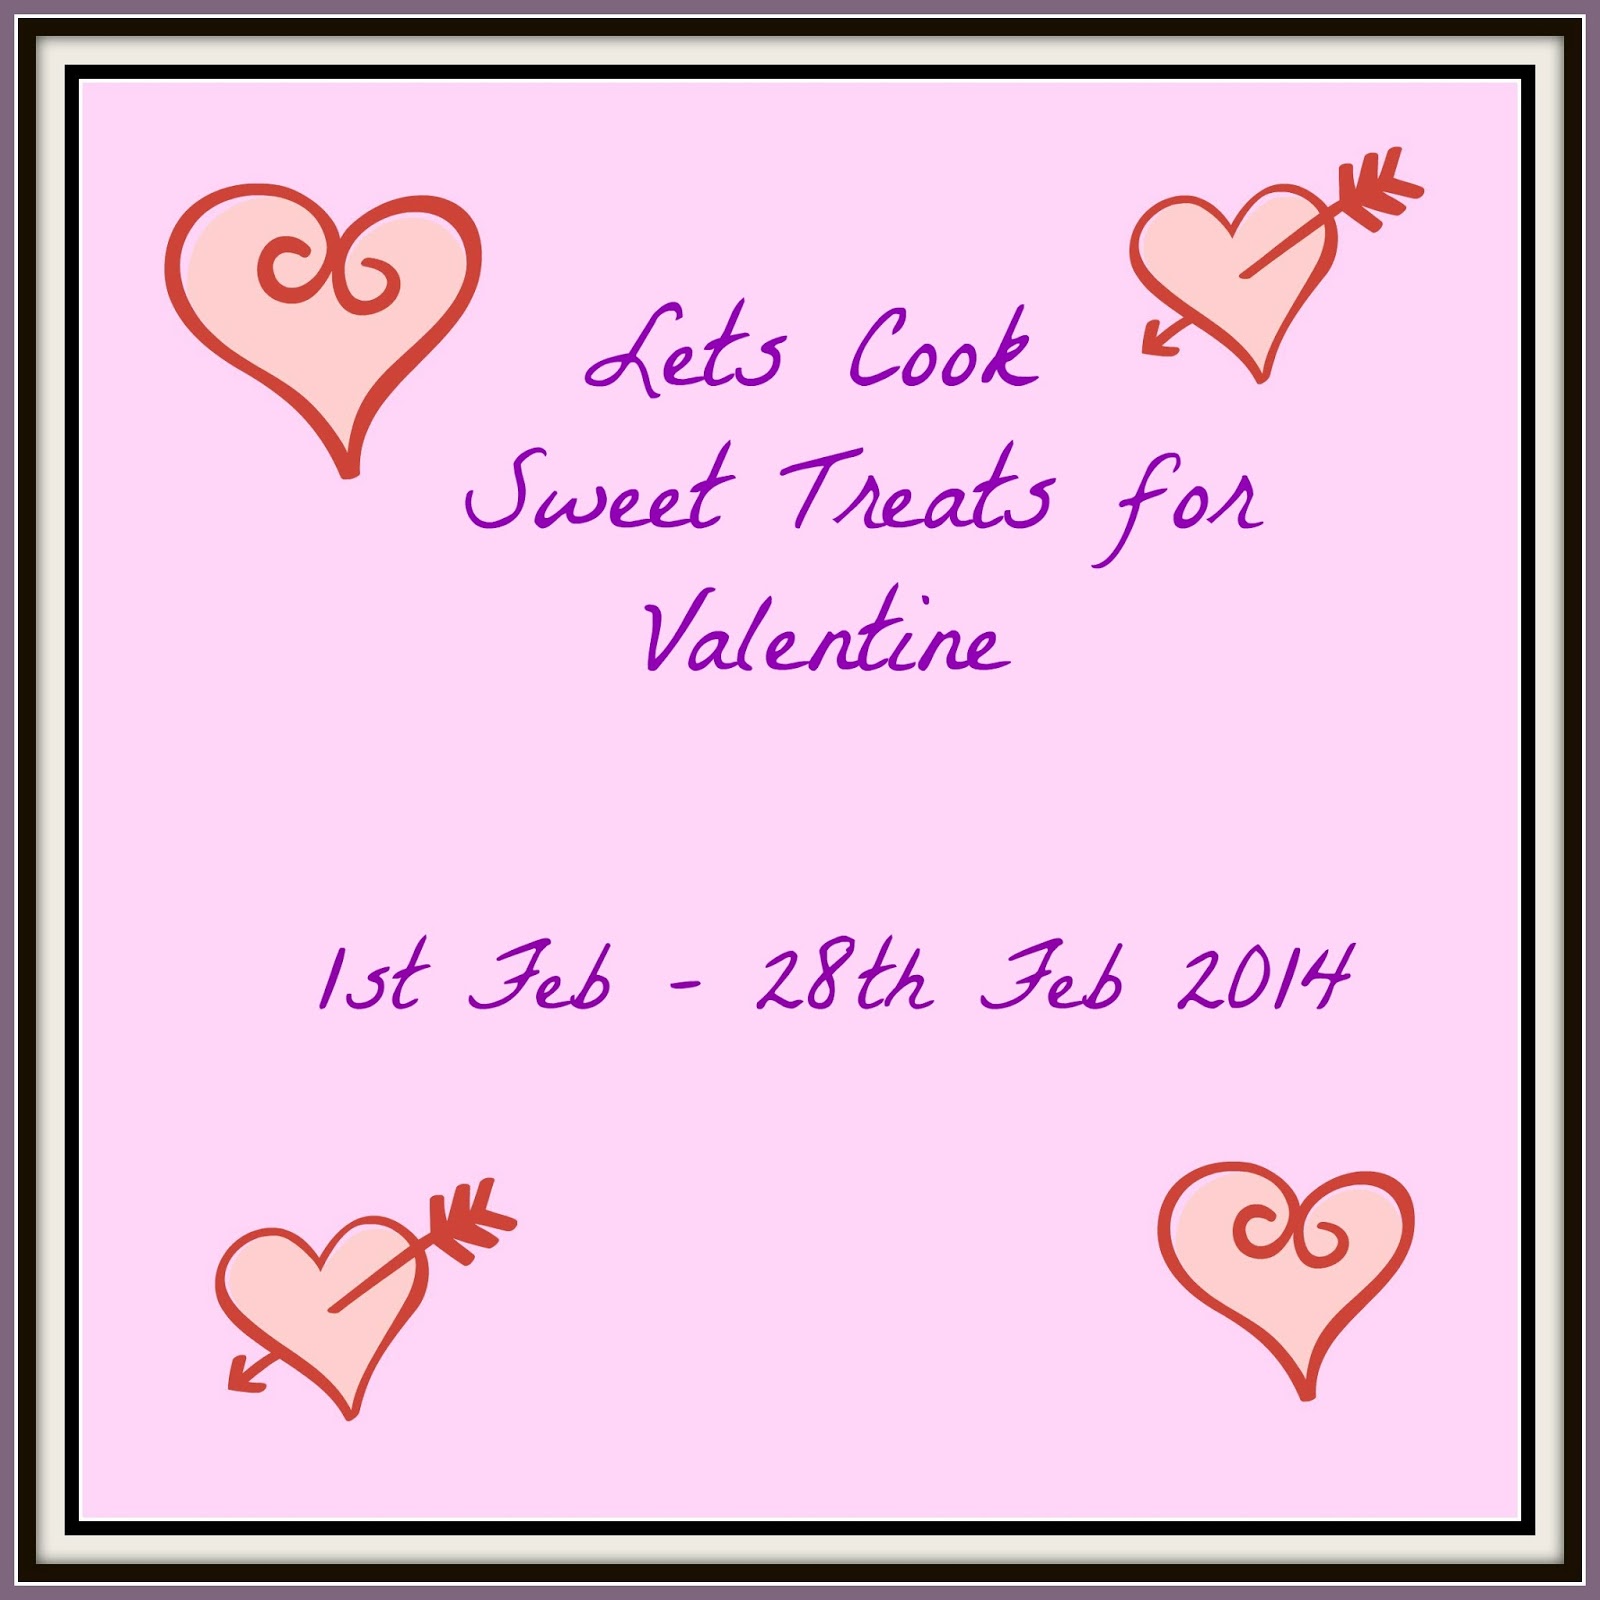 Lets cook sweet treats for valentine logo